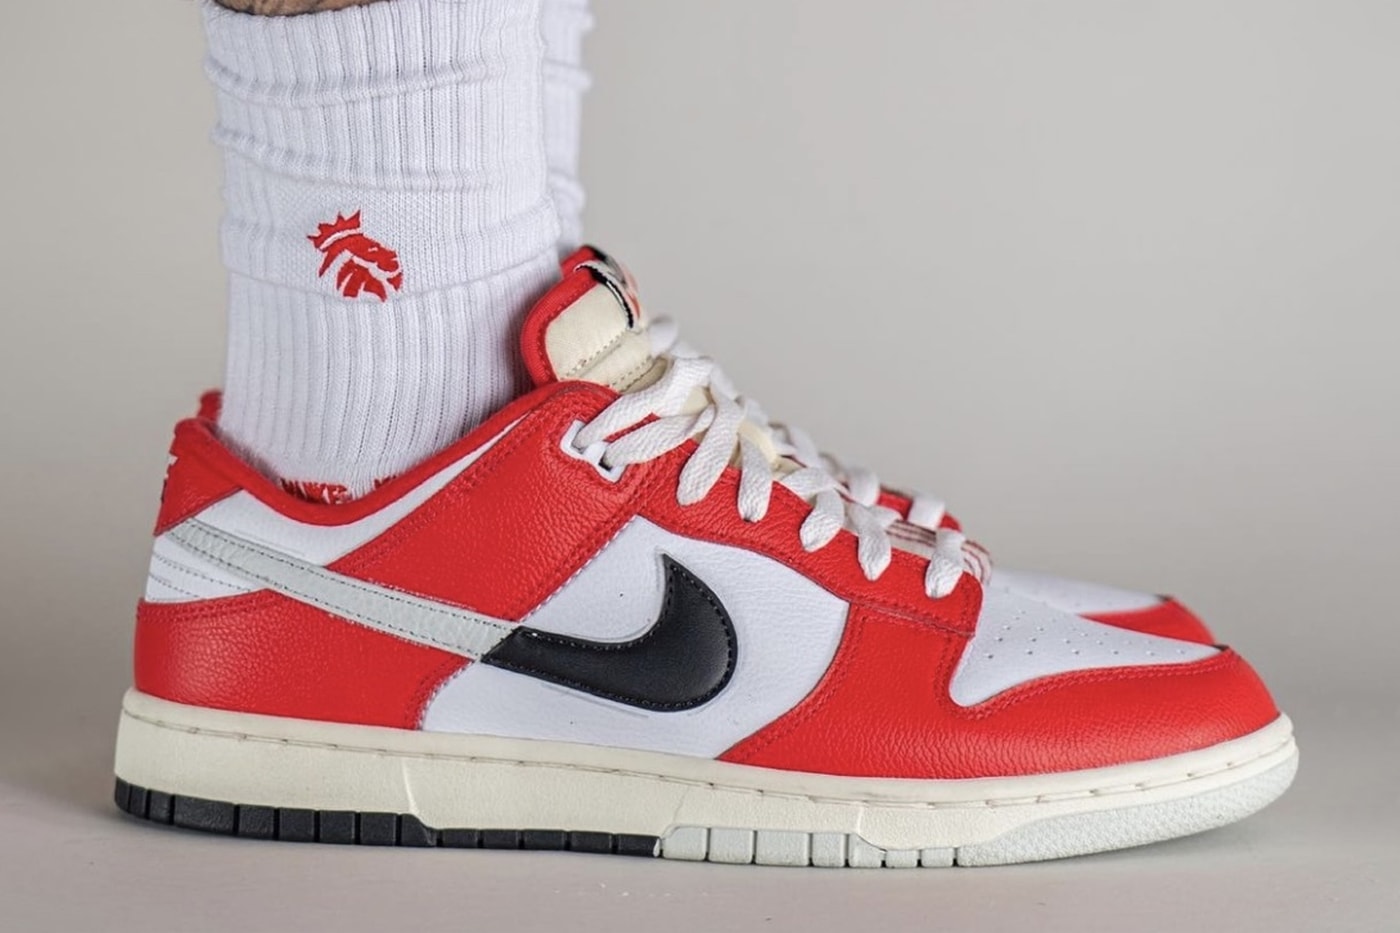 Nike Dunk Low “Chicago Split” On-Foot Photos | Hypebeast